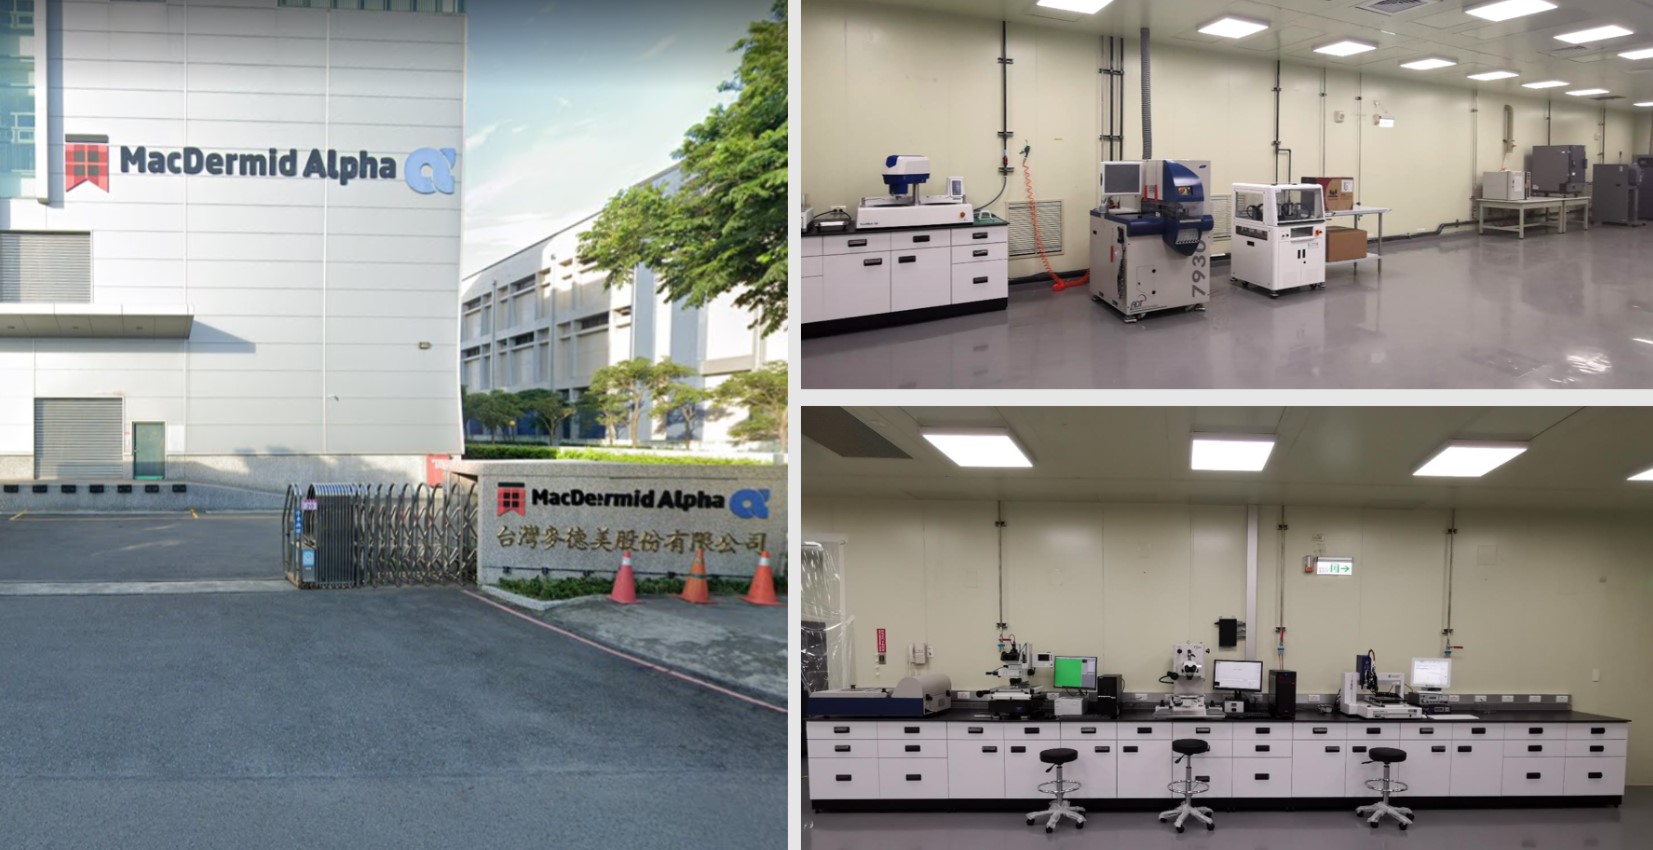 Three photos of new MacDermid Alpha Applications Lab in Taiwan, one of the building and two inside the lab